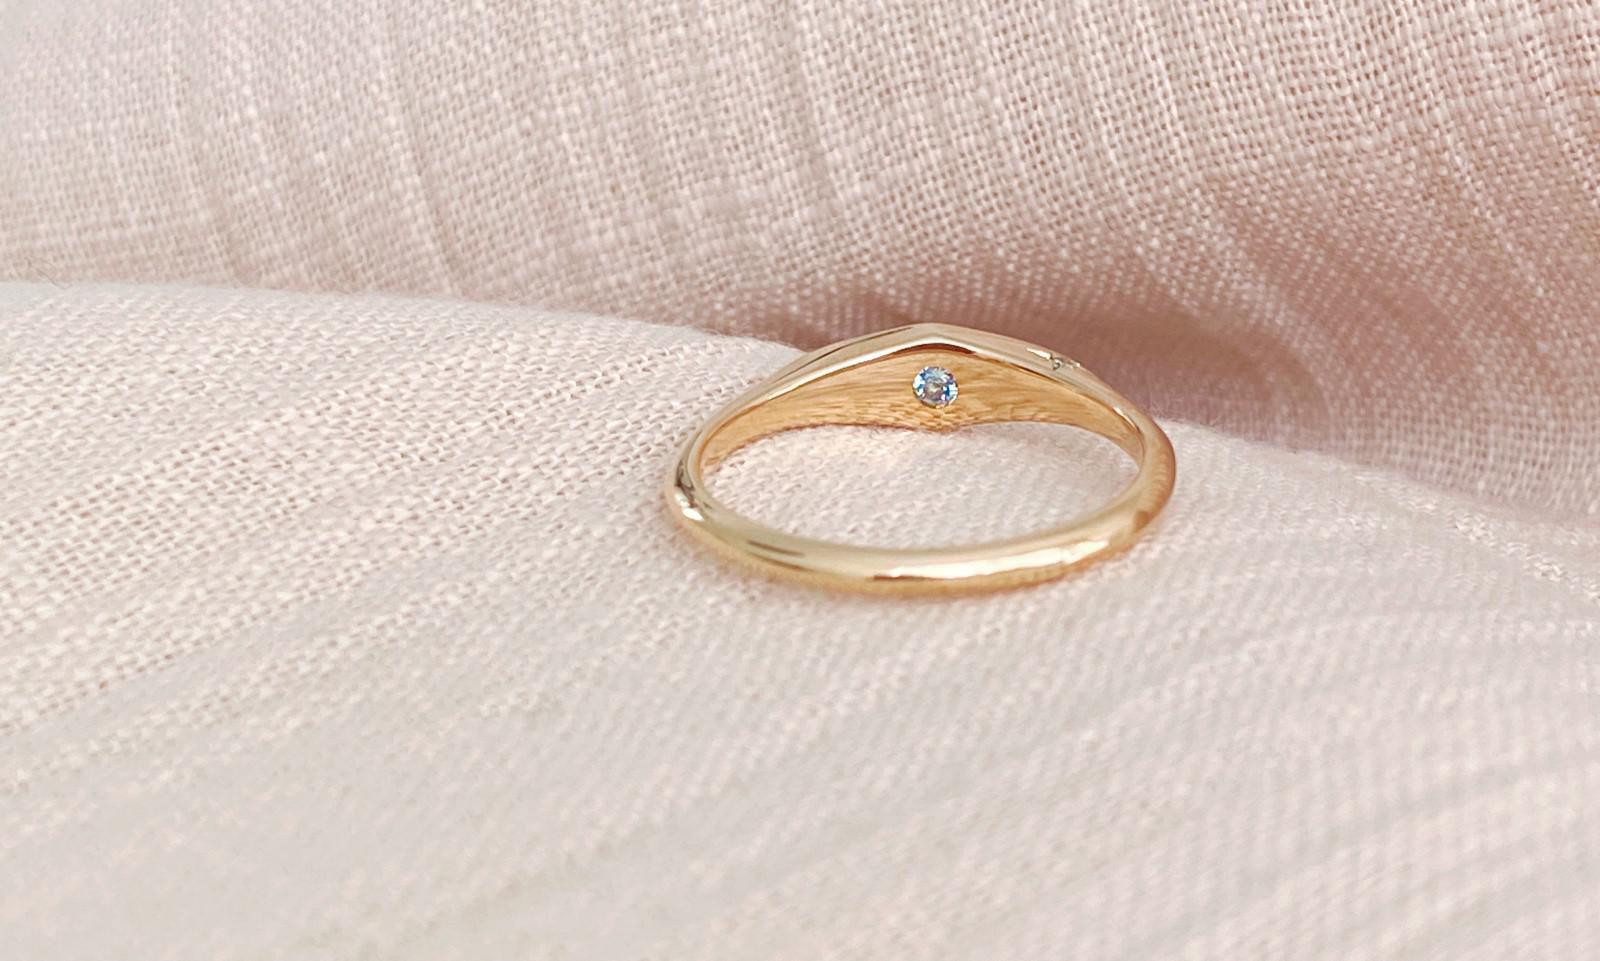 Gold signet engagement ring details with blue topaz